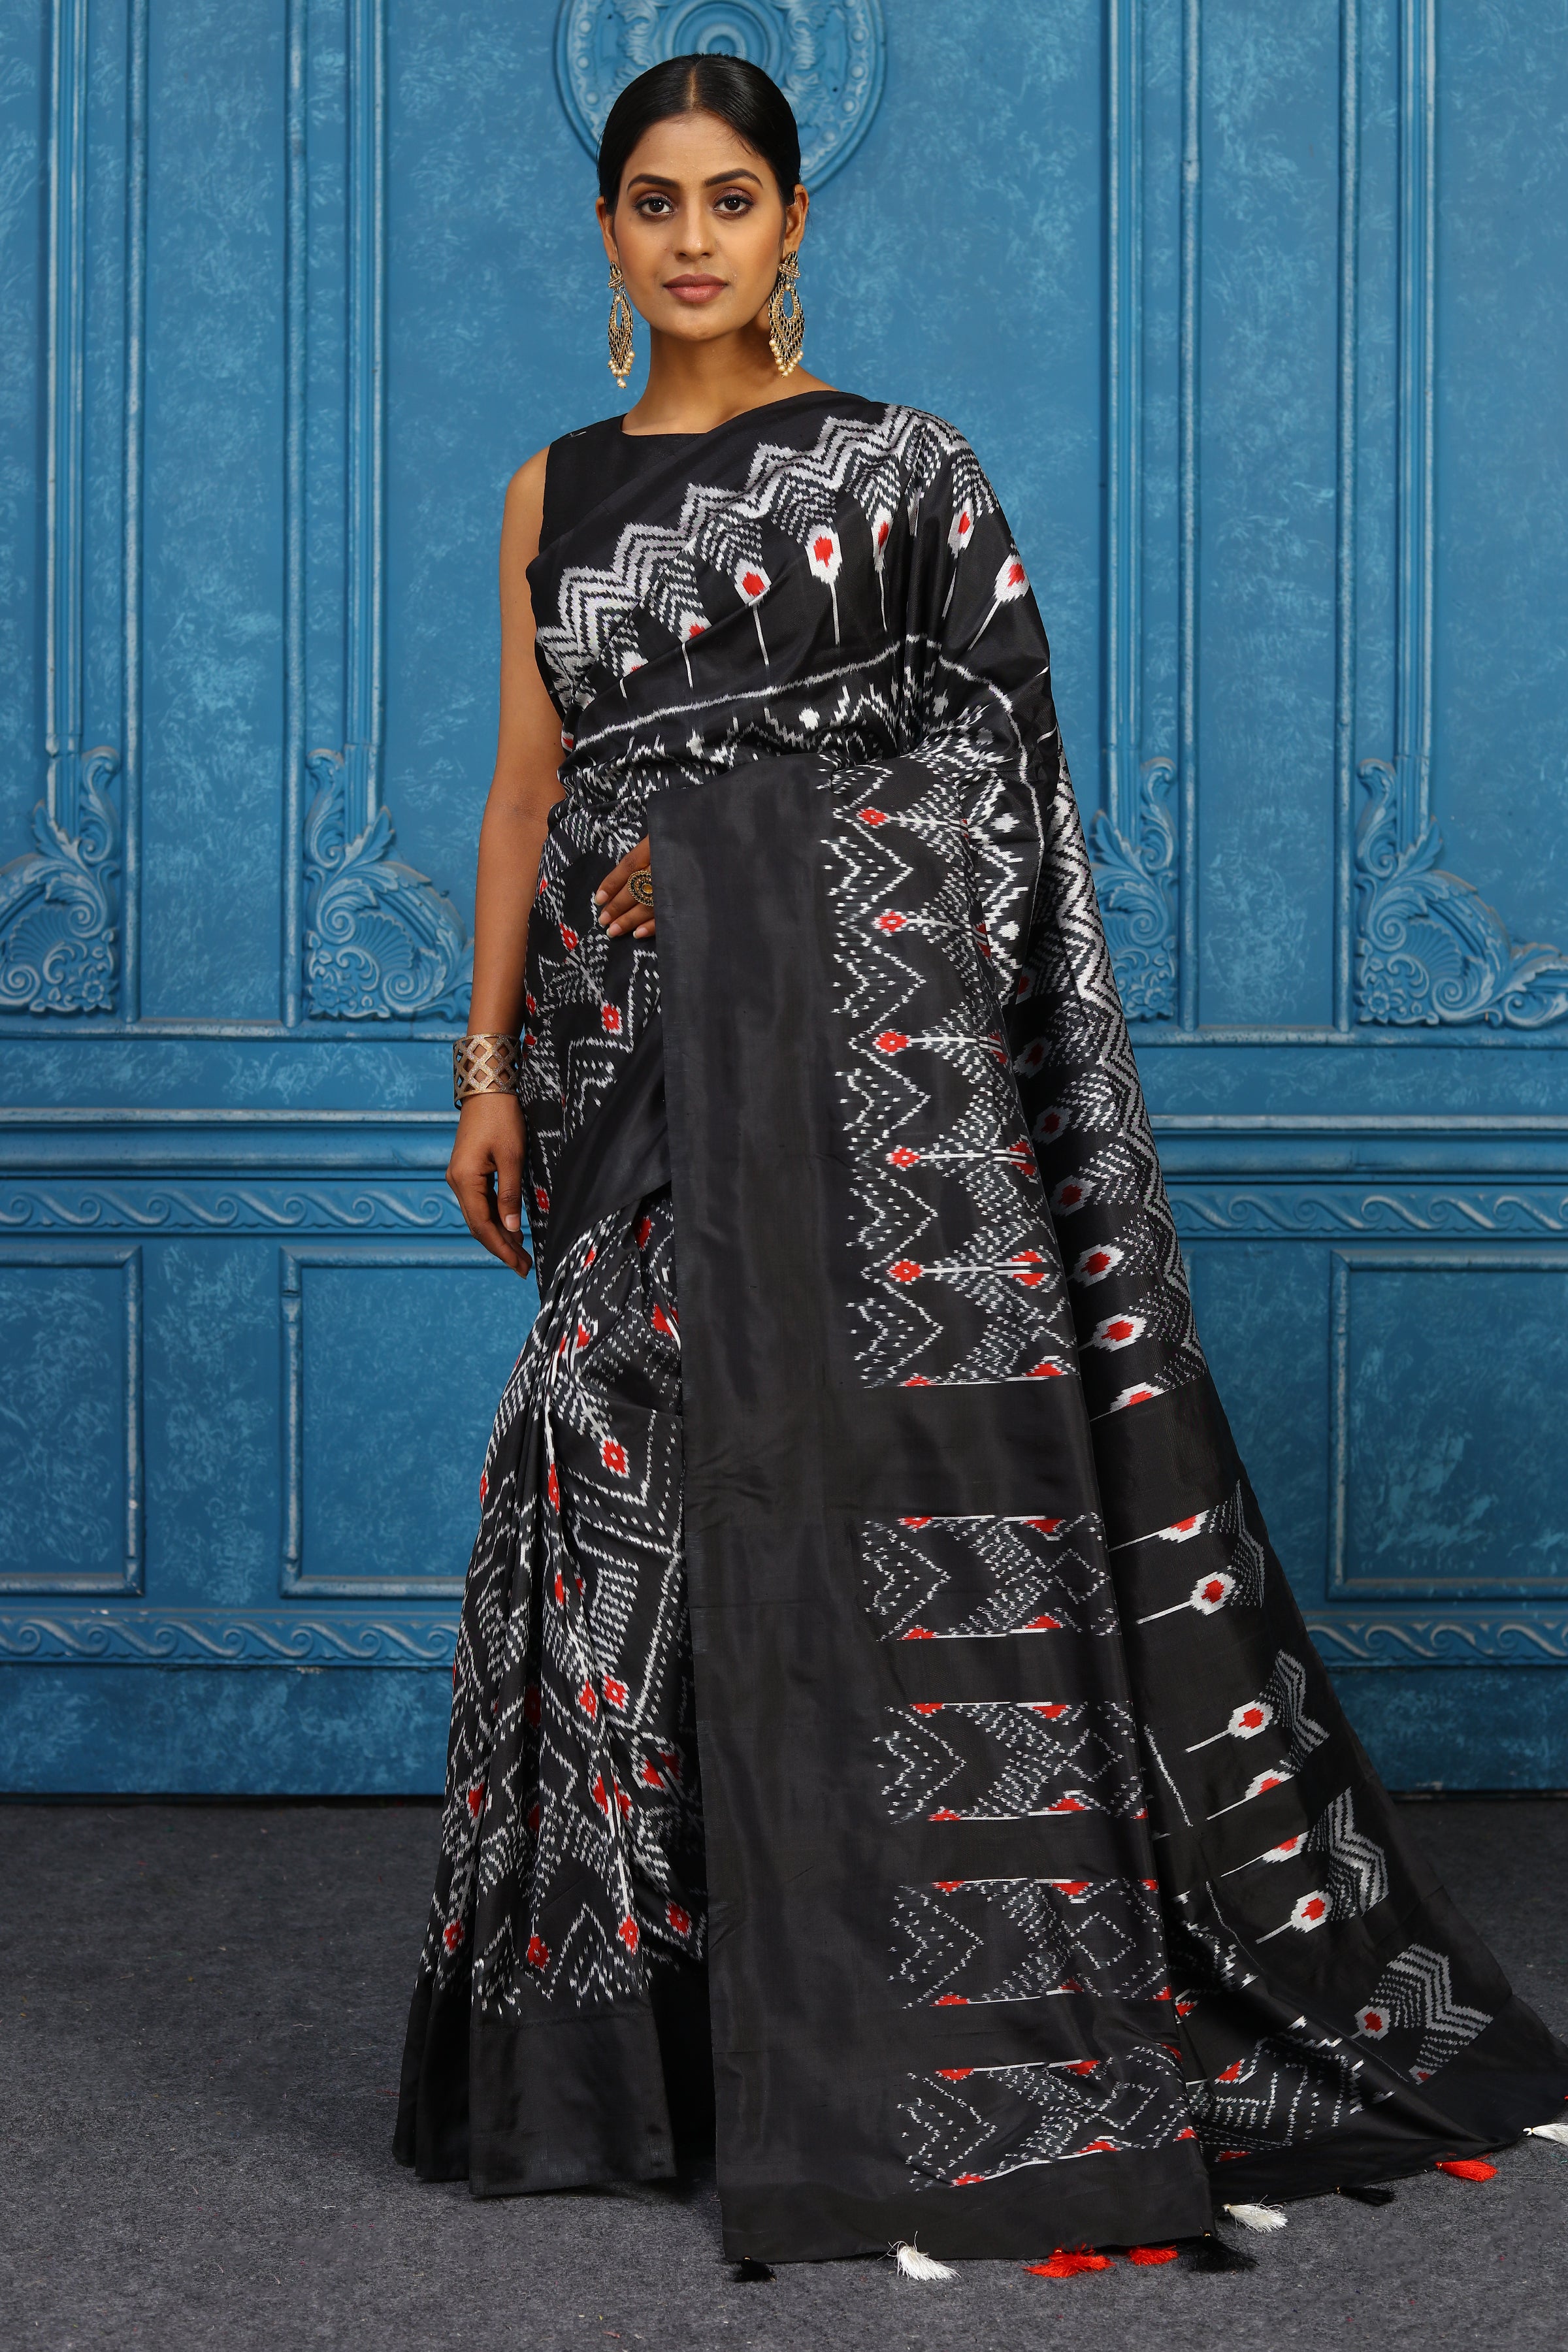 Shop black and white pochampally silk ikkat sari online in USA. Look your best on festive occasions in latest designer sarees, pure silk sarees, Kanchipuram sarees, handwoven sarees, tussar silk sarees, embroidered sarees from Pure Elegance Indian clothing store in USA.-full view